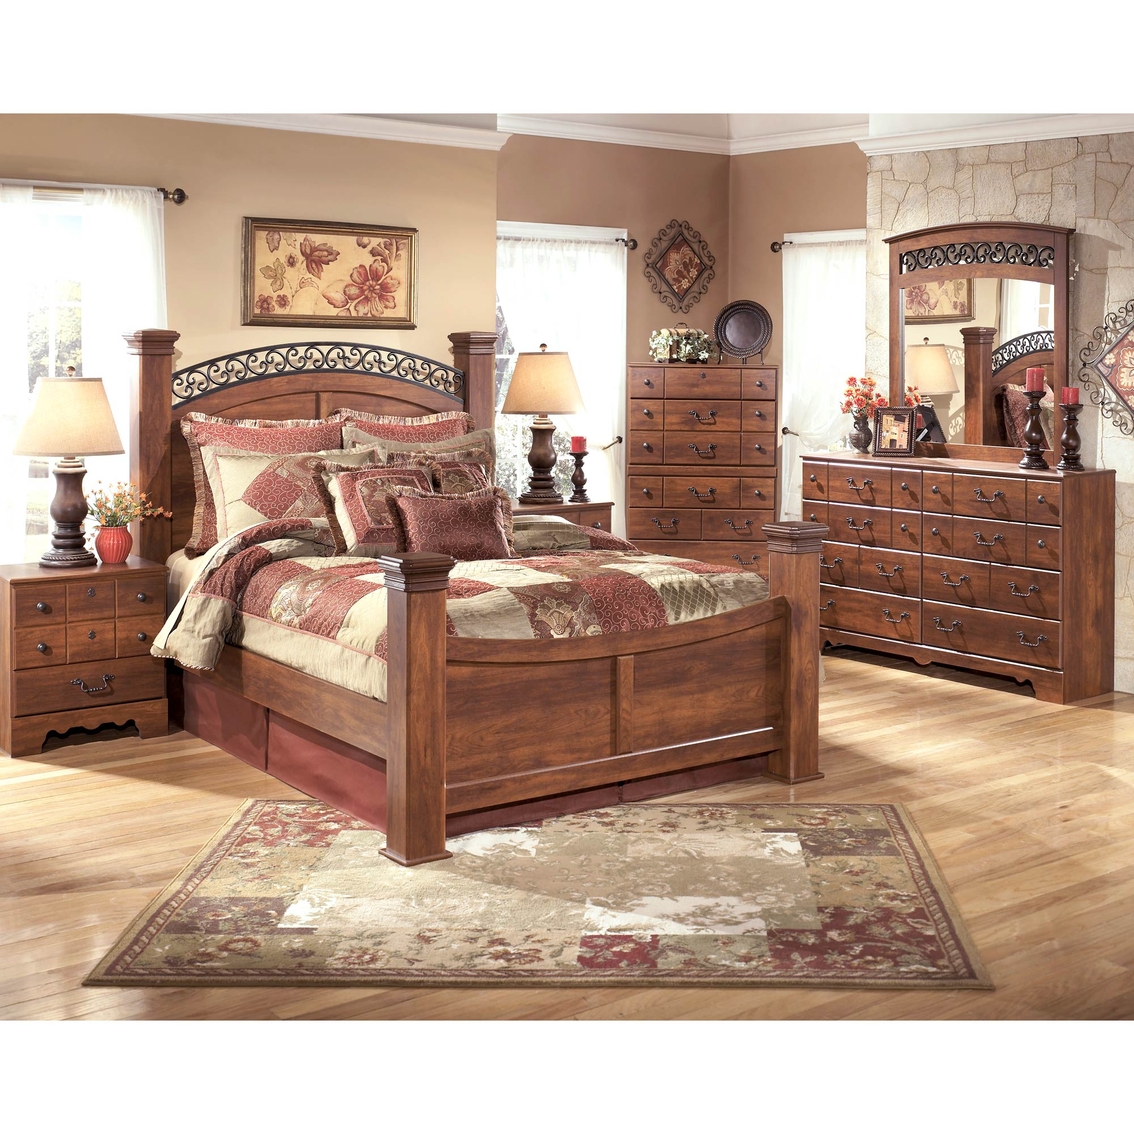 Signature Design by Ashley Timberline Poster Bed - Image 2 of 2